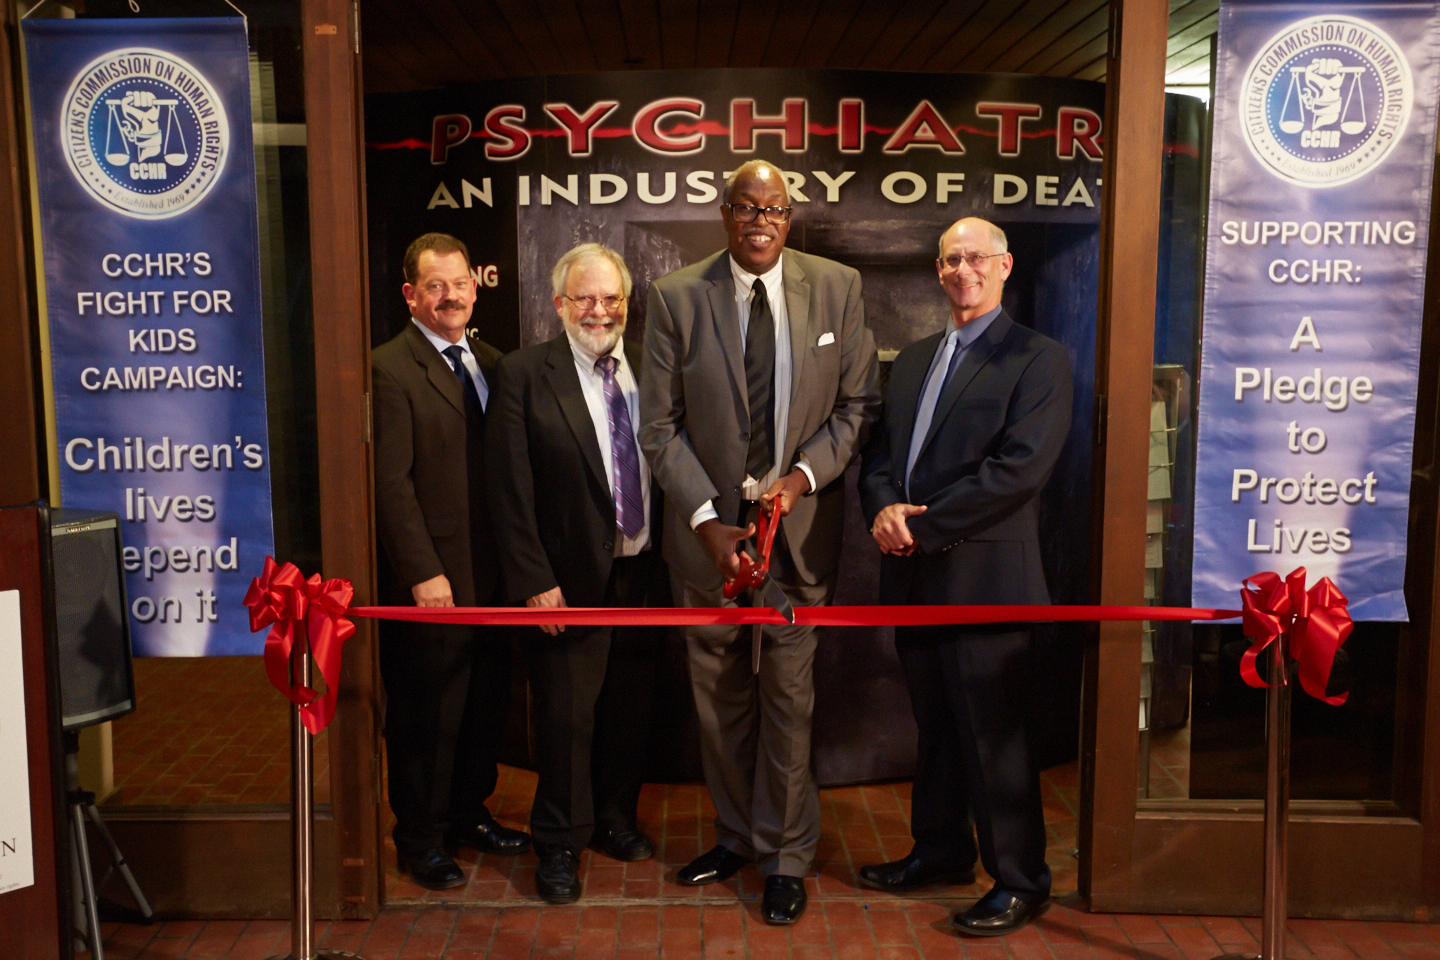 Mr. James Sweeney stands poised to cut the ribbon and officially open the Psychiatry: An Industry of Death Exhibit along with (left to right) Mike Klagenberg, Bob Johnson & Jim Van Hill.